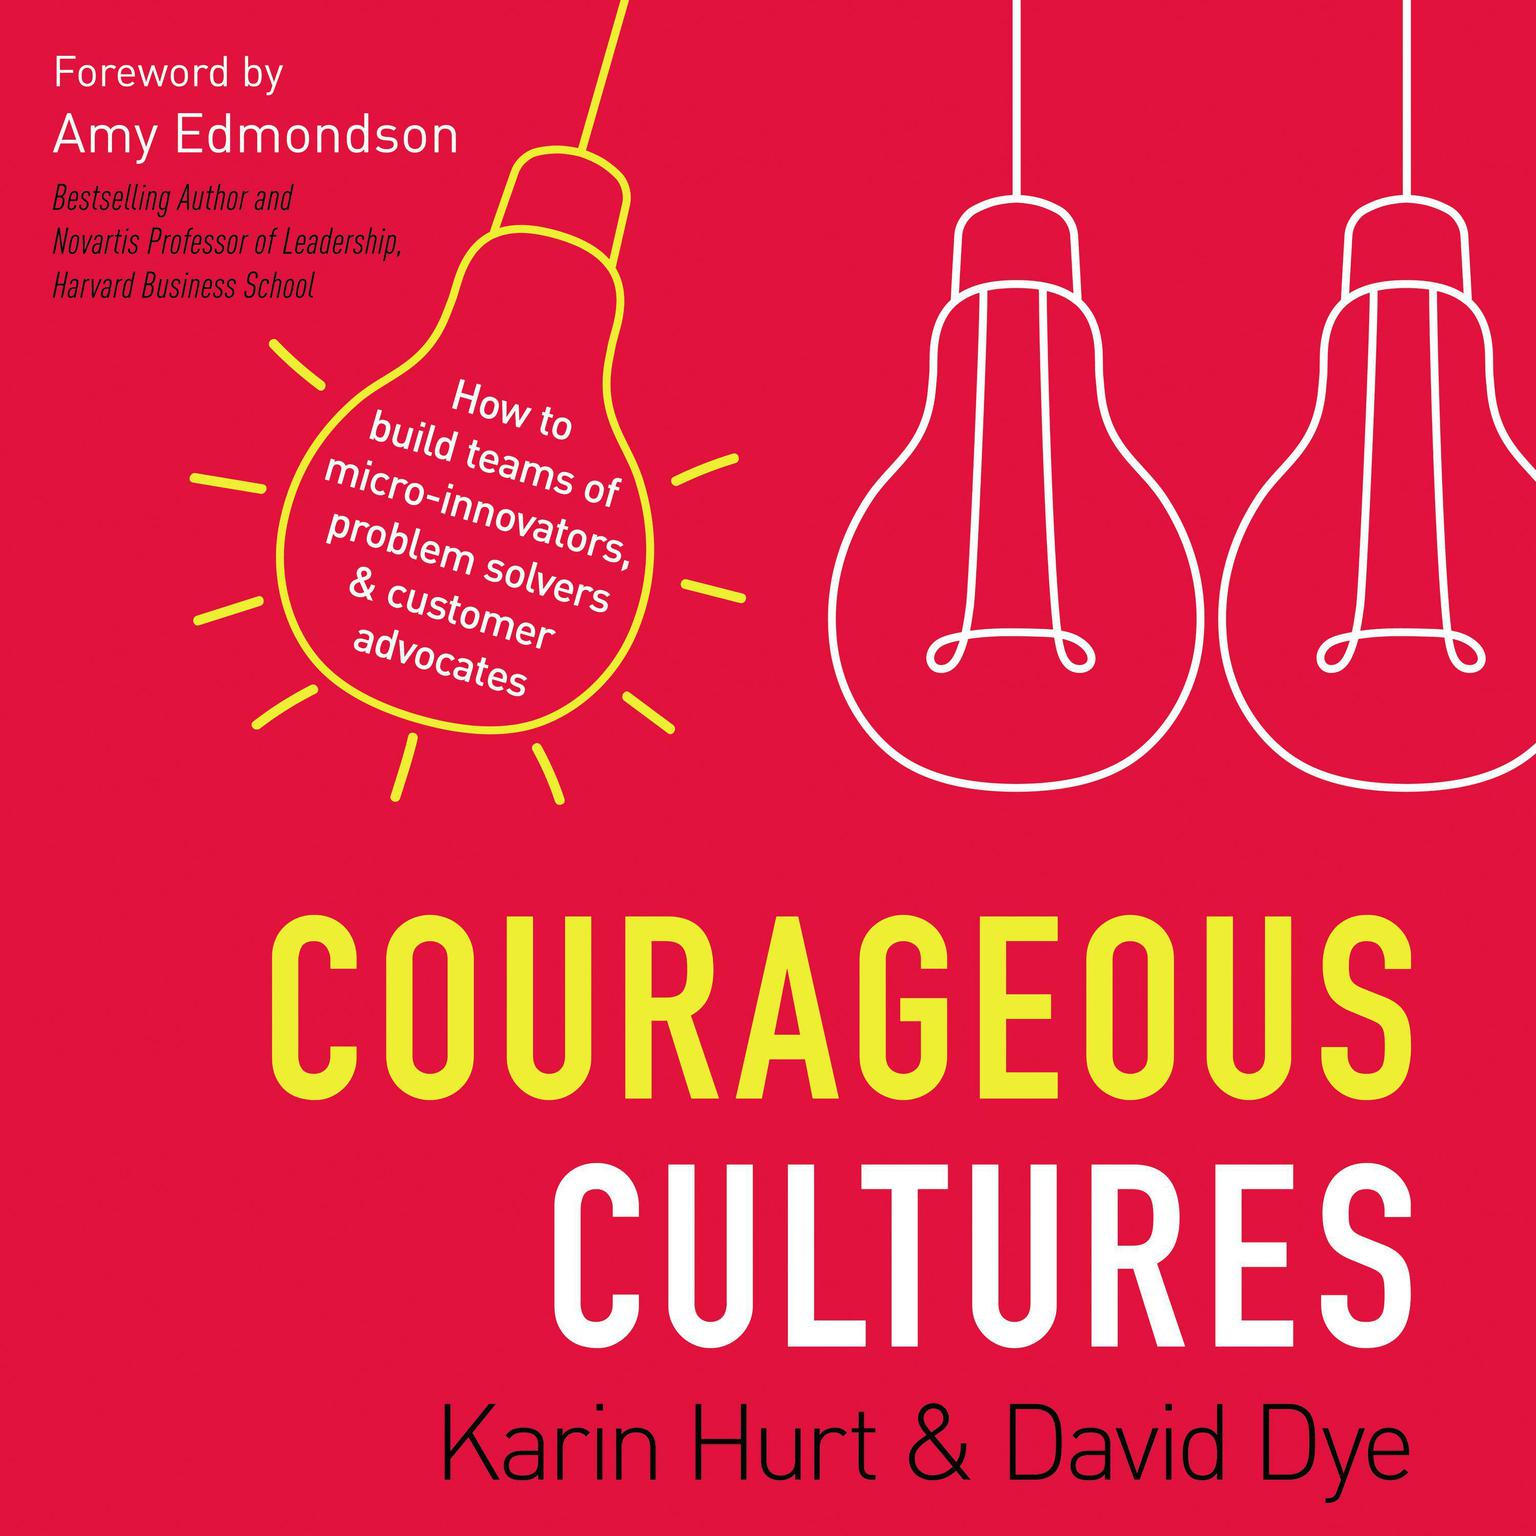 Courageous Cultures: How to Build Teams of Micro-Innovators, Problem Solvers, and Customer Advocates Audiobook, by David Dye